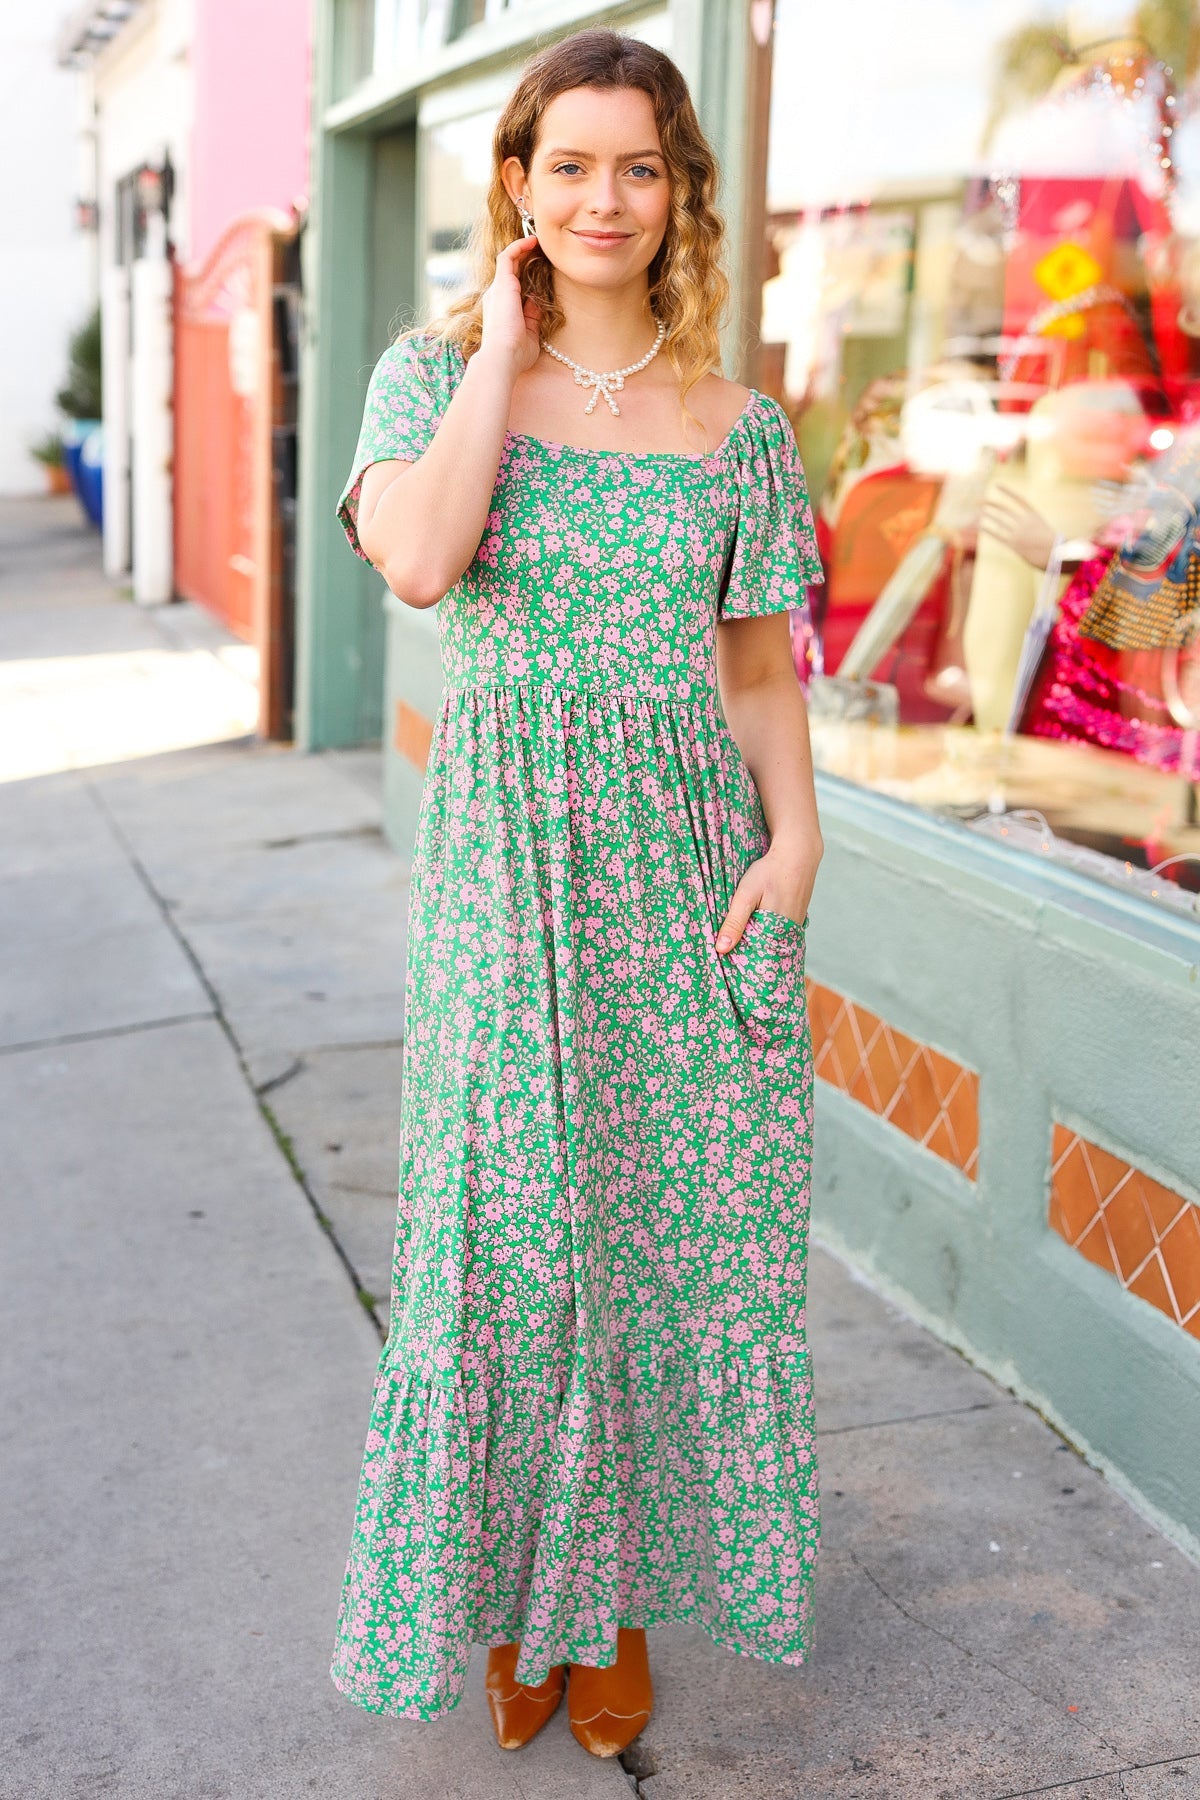 Explore More Collection - Perfectly You Green Ditzy Floral Fit & Flare Maxi Dress